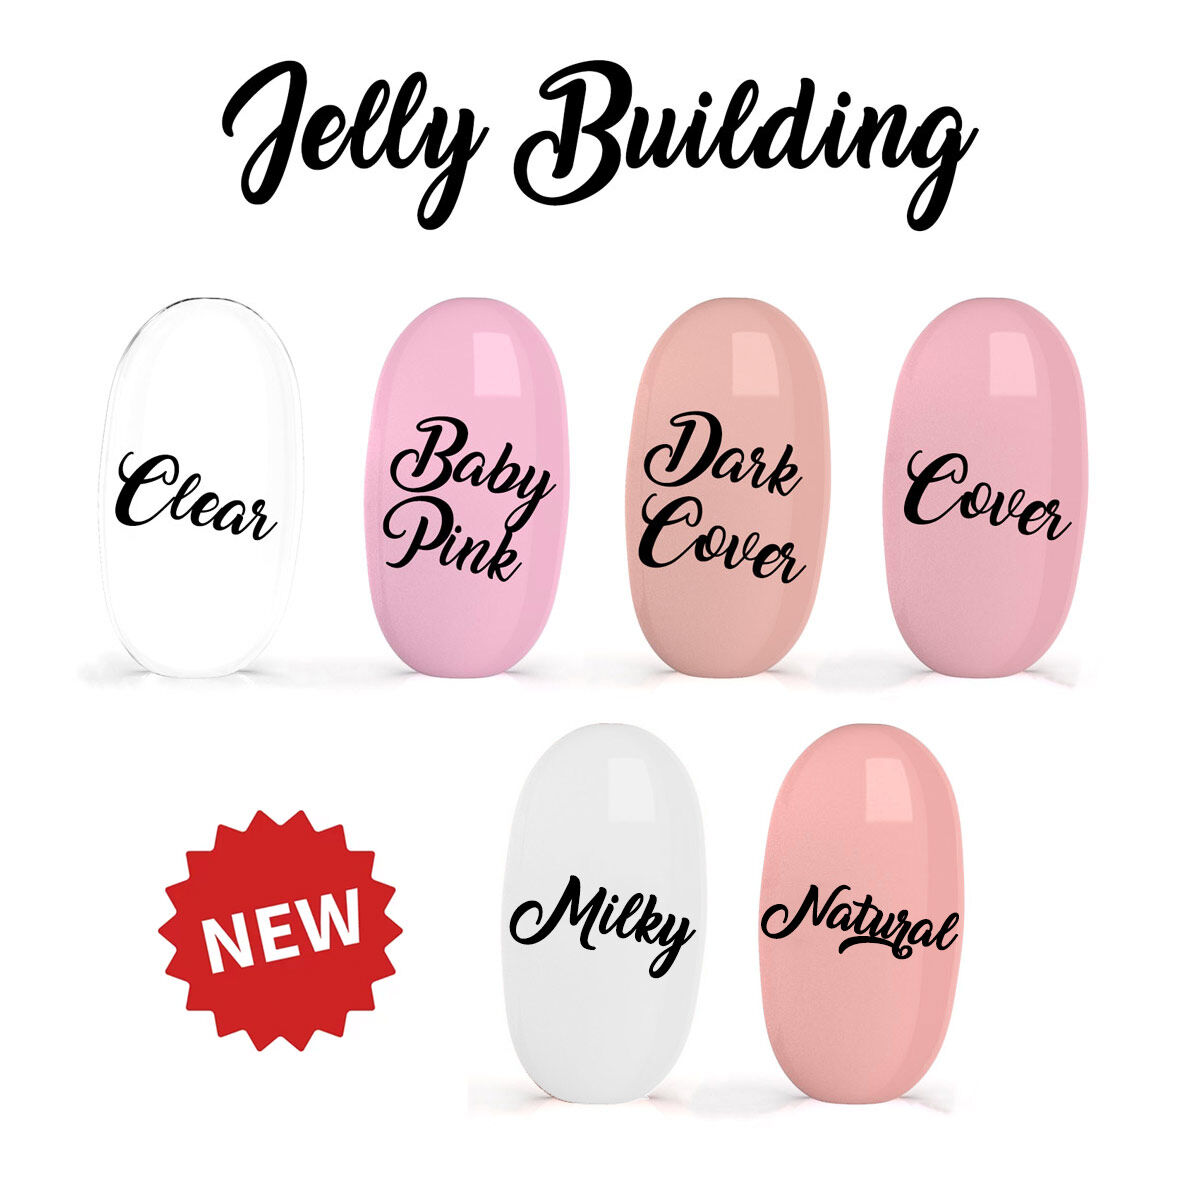 Jelly gels